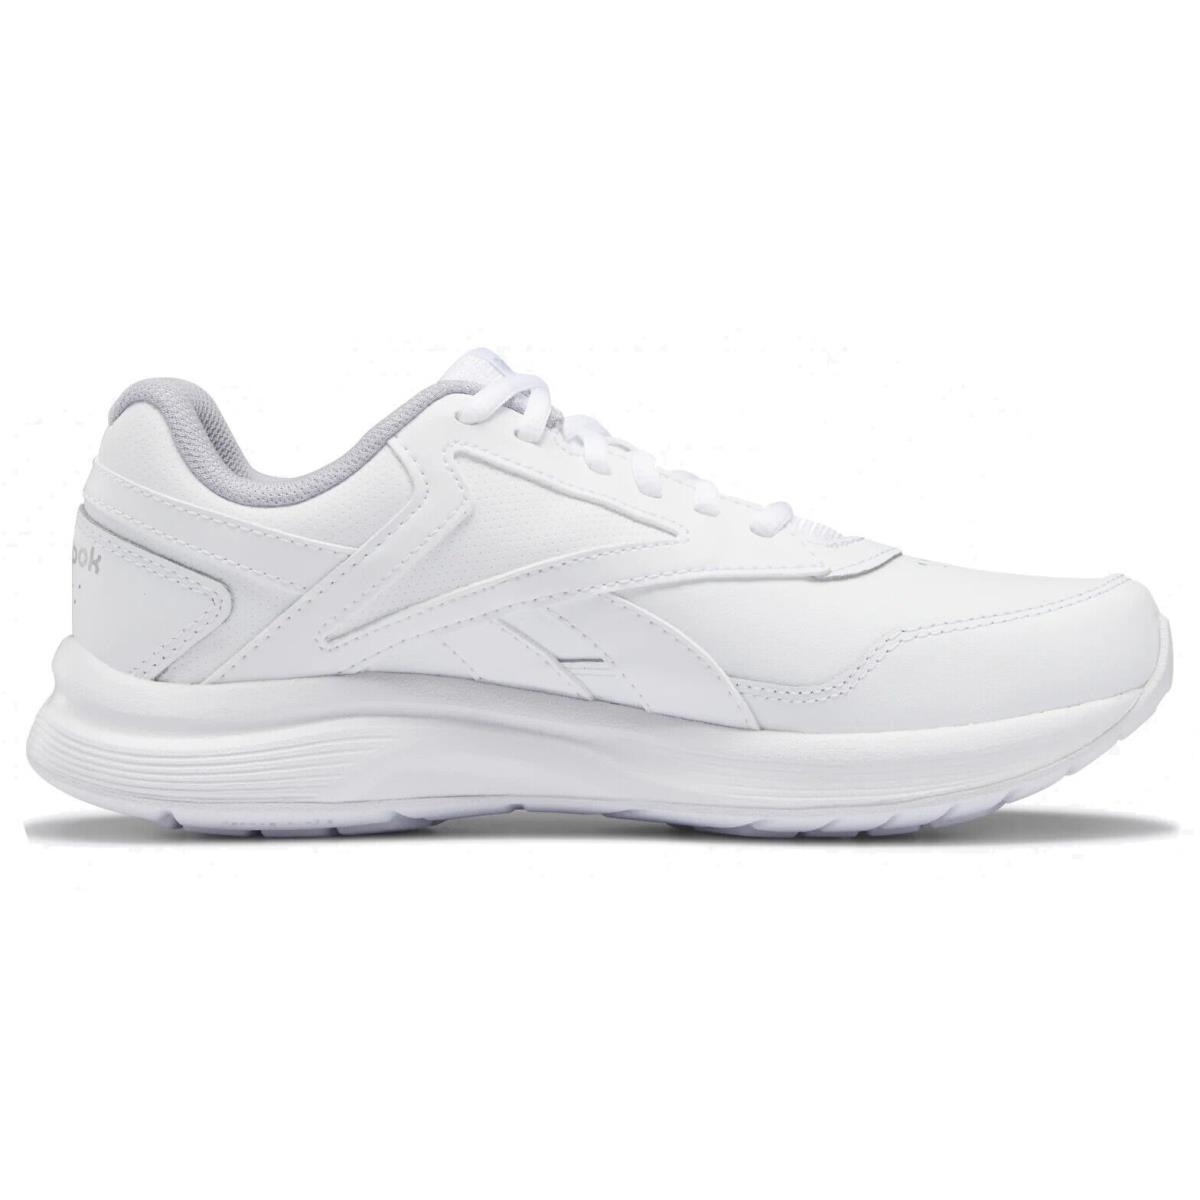 Reebok Men`s Walking Shoes Leather Upper Lightweight Breathable Ultra 7 Dmx Max White